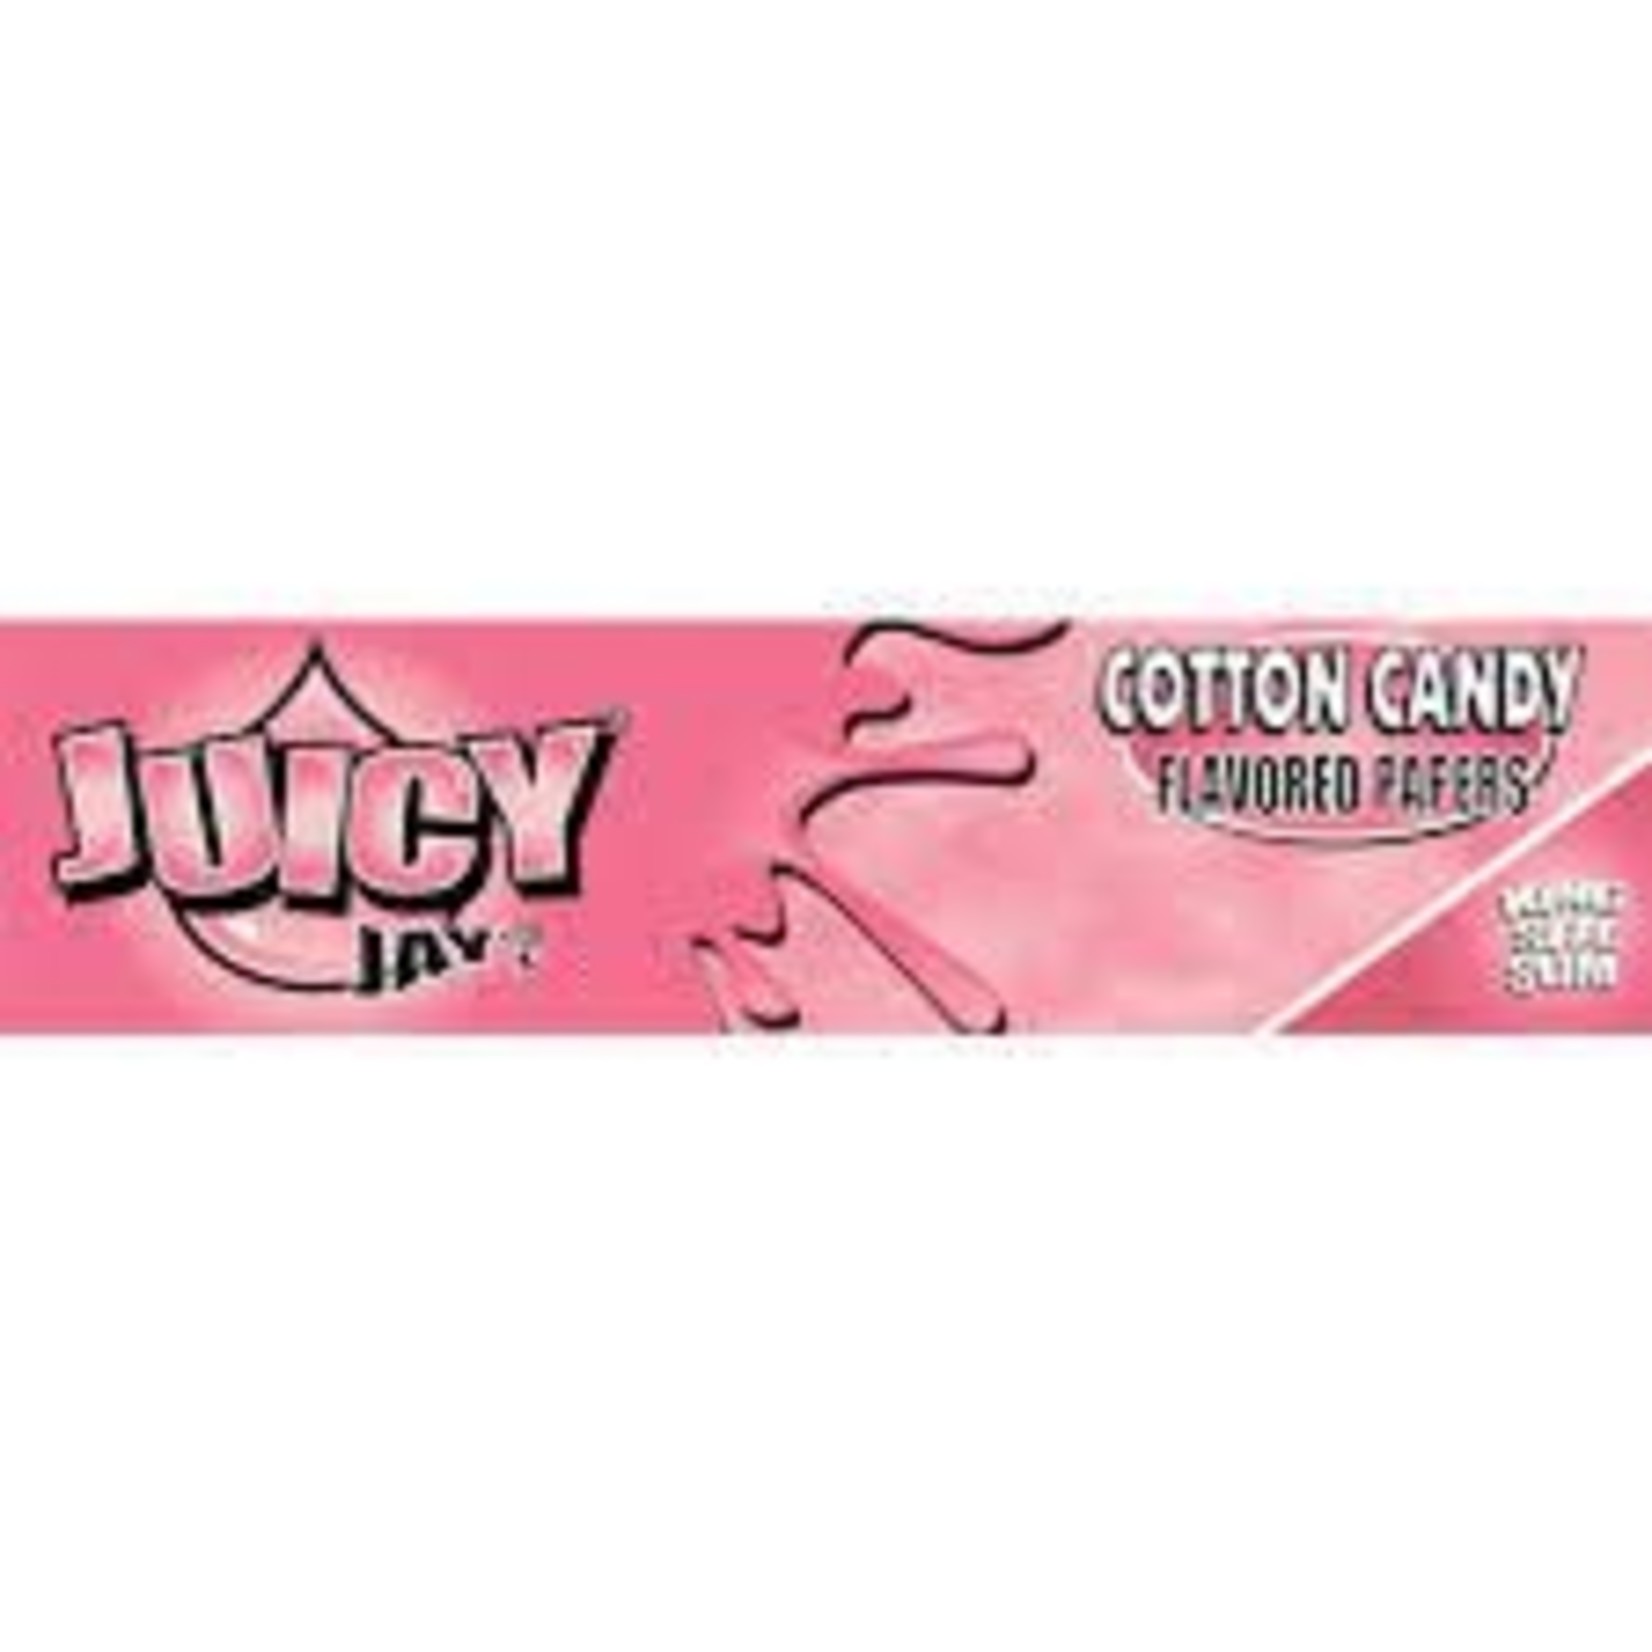 Juicy Jay's Cotton Candy